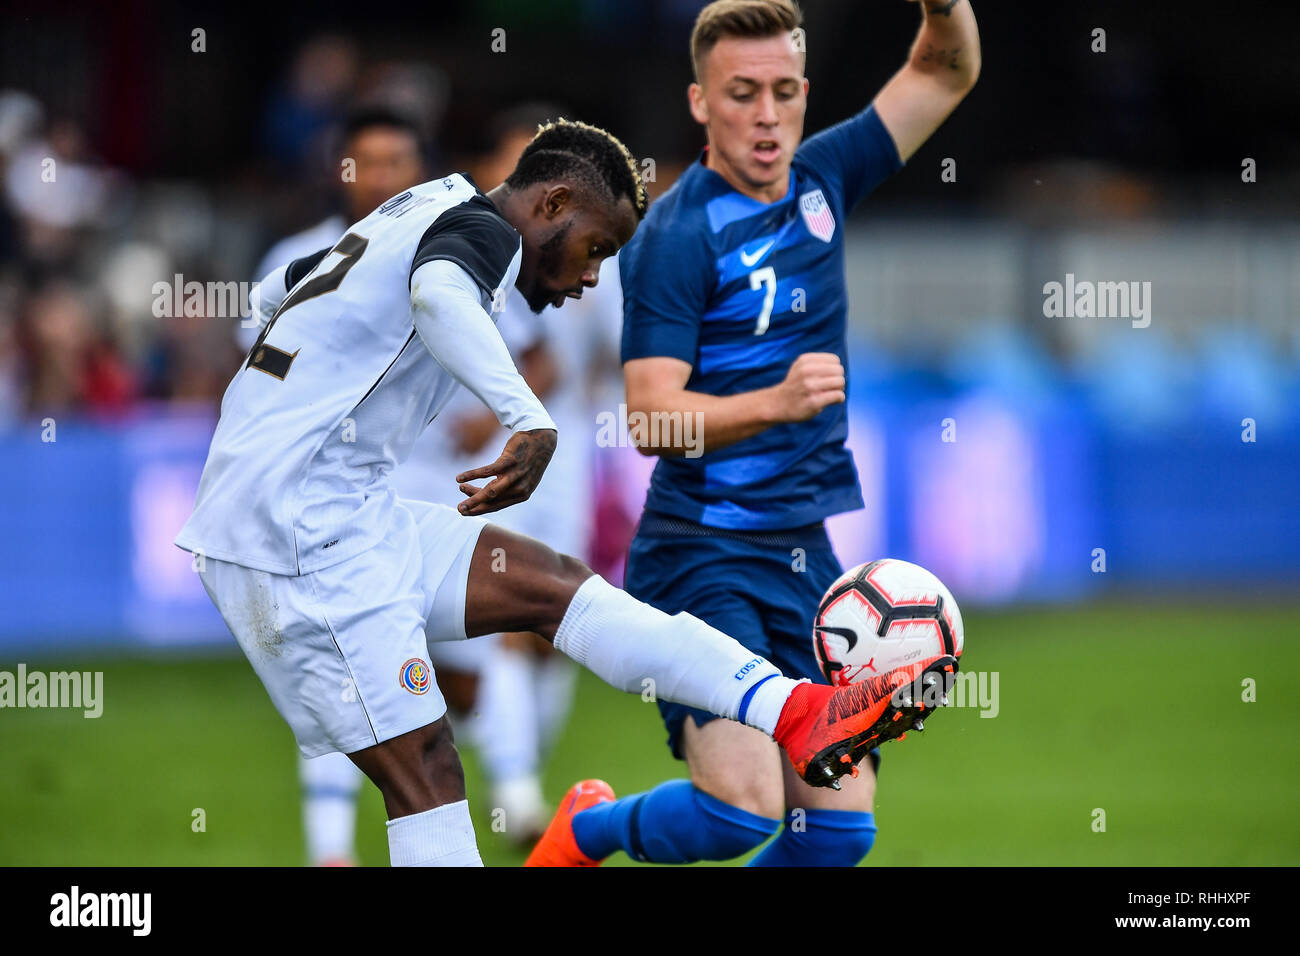 San Jose, California, USA. 2nd Feb, 2019. Costa Rica defender Waylon Francis (12) in action during the international friendly soccer match between Costa Rica and the United States at Avaya Stadium in San Jose, California. Chris Brown/CSM *** Corrects an earlier version filed under an incorrect headline Credit: csm/Alamy Live News Stock Photo